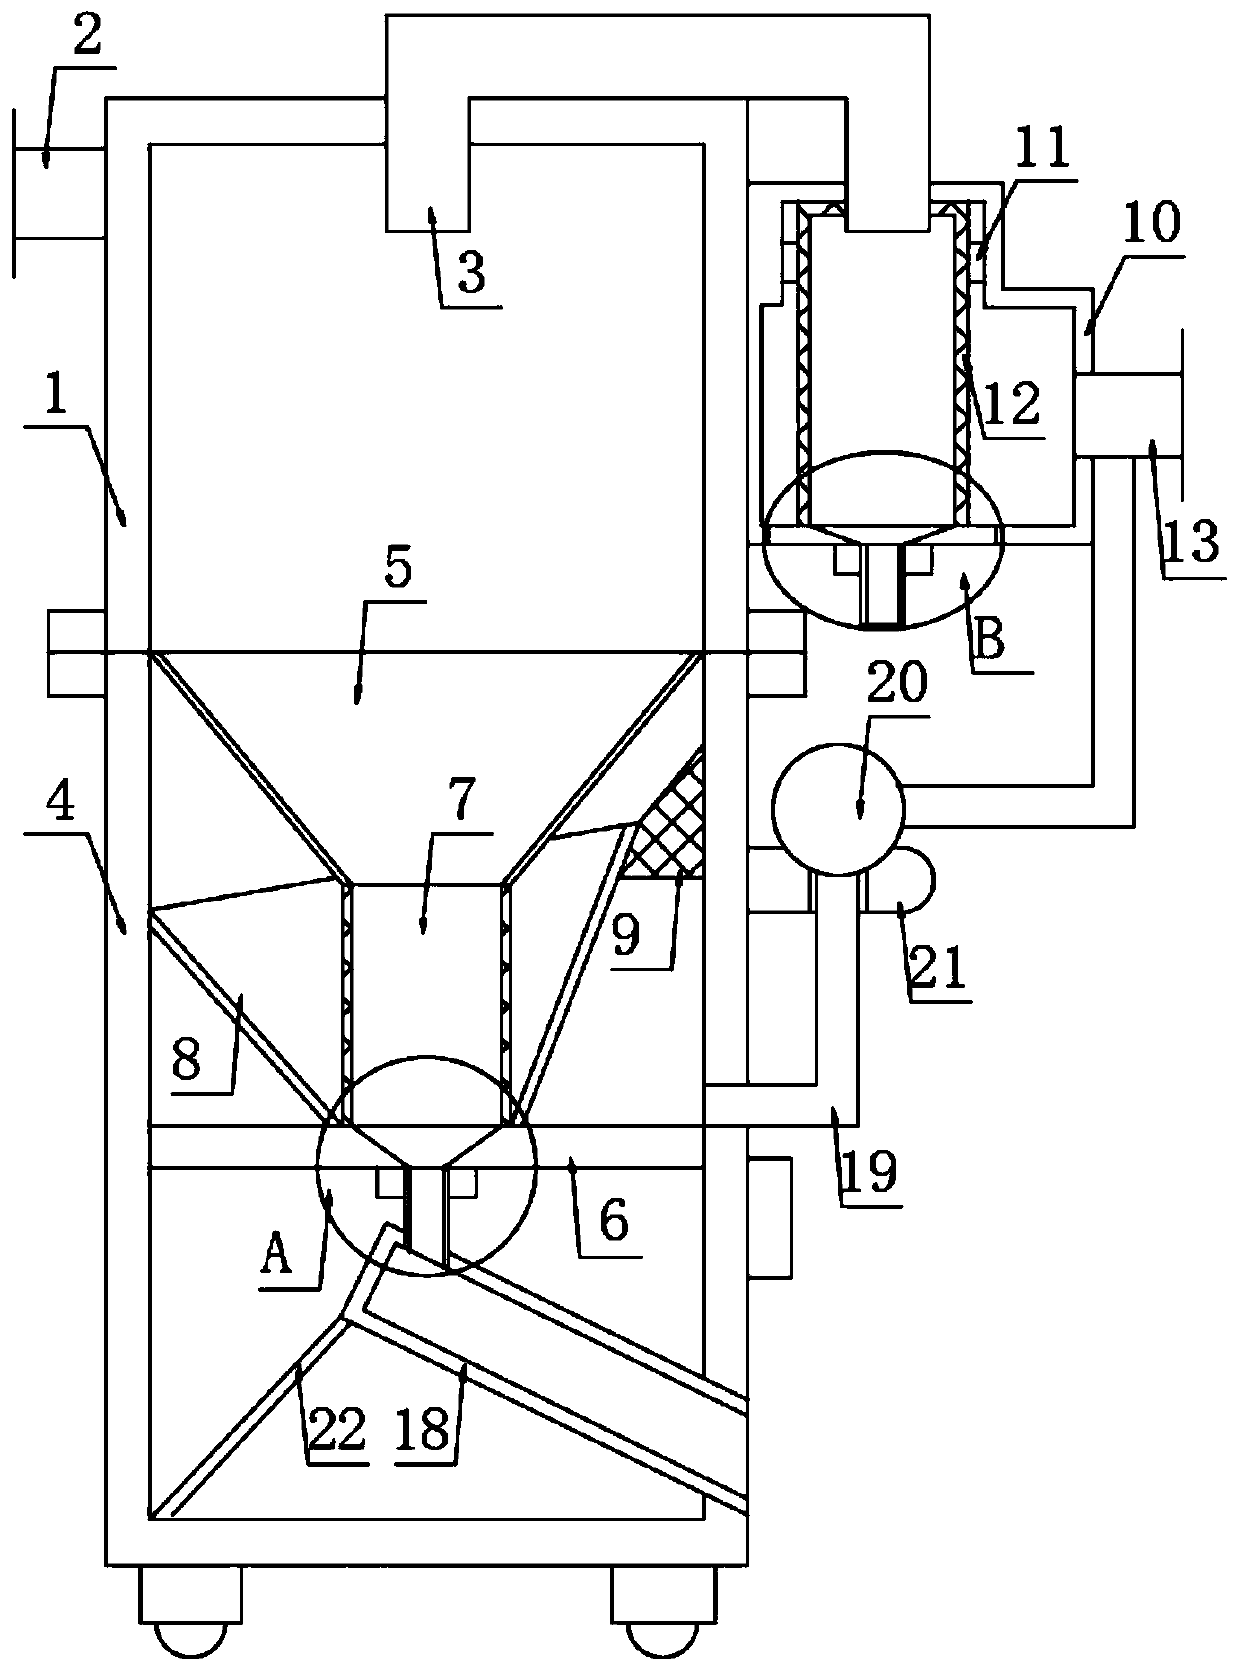 Spiral-flow type sand-removing, sand-discharging and filtering device for agricultural irrigation